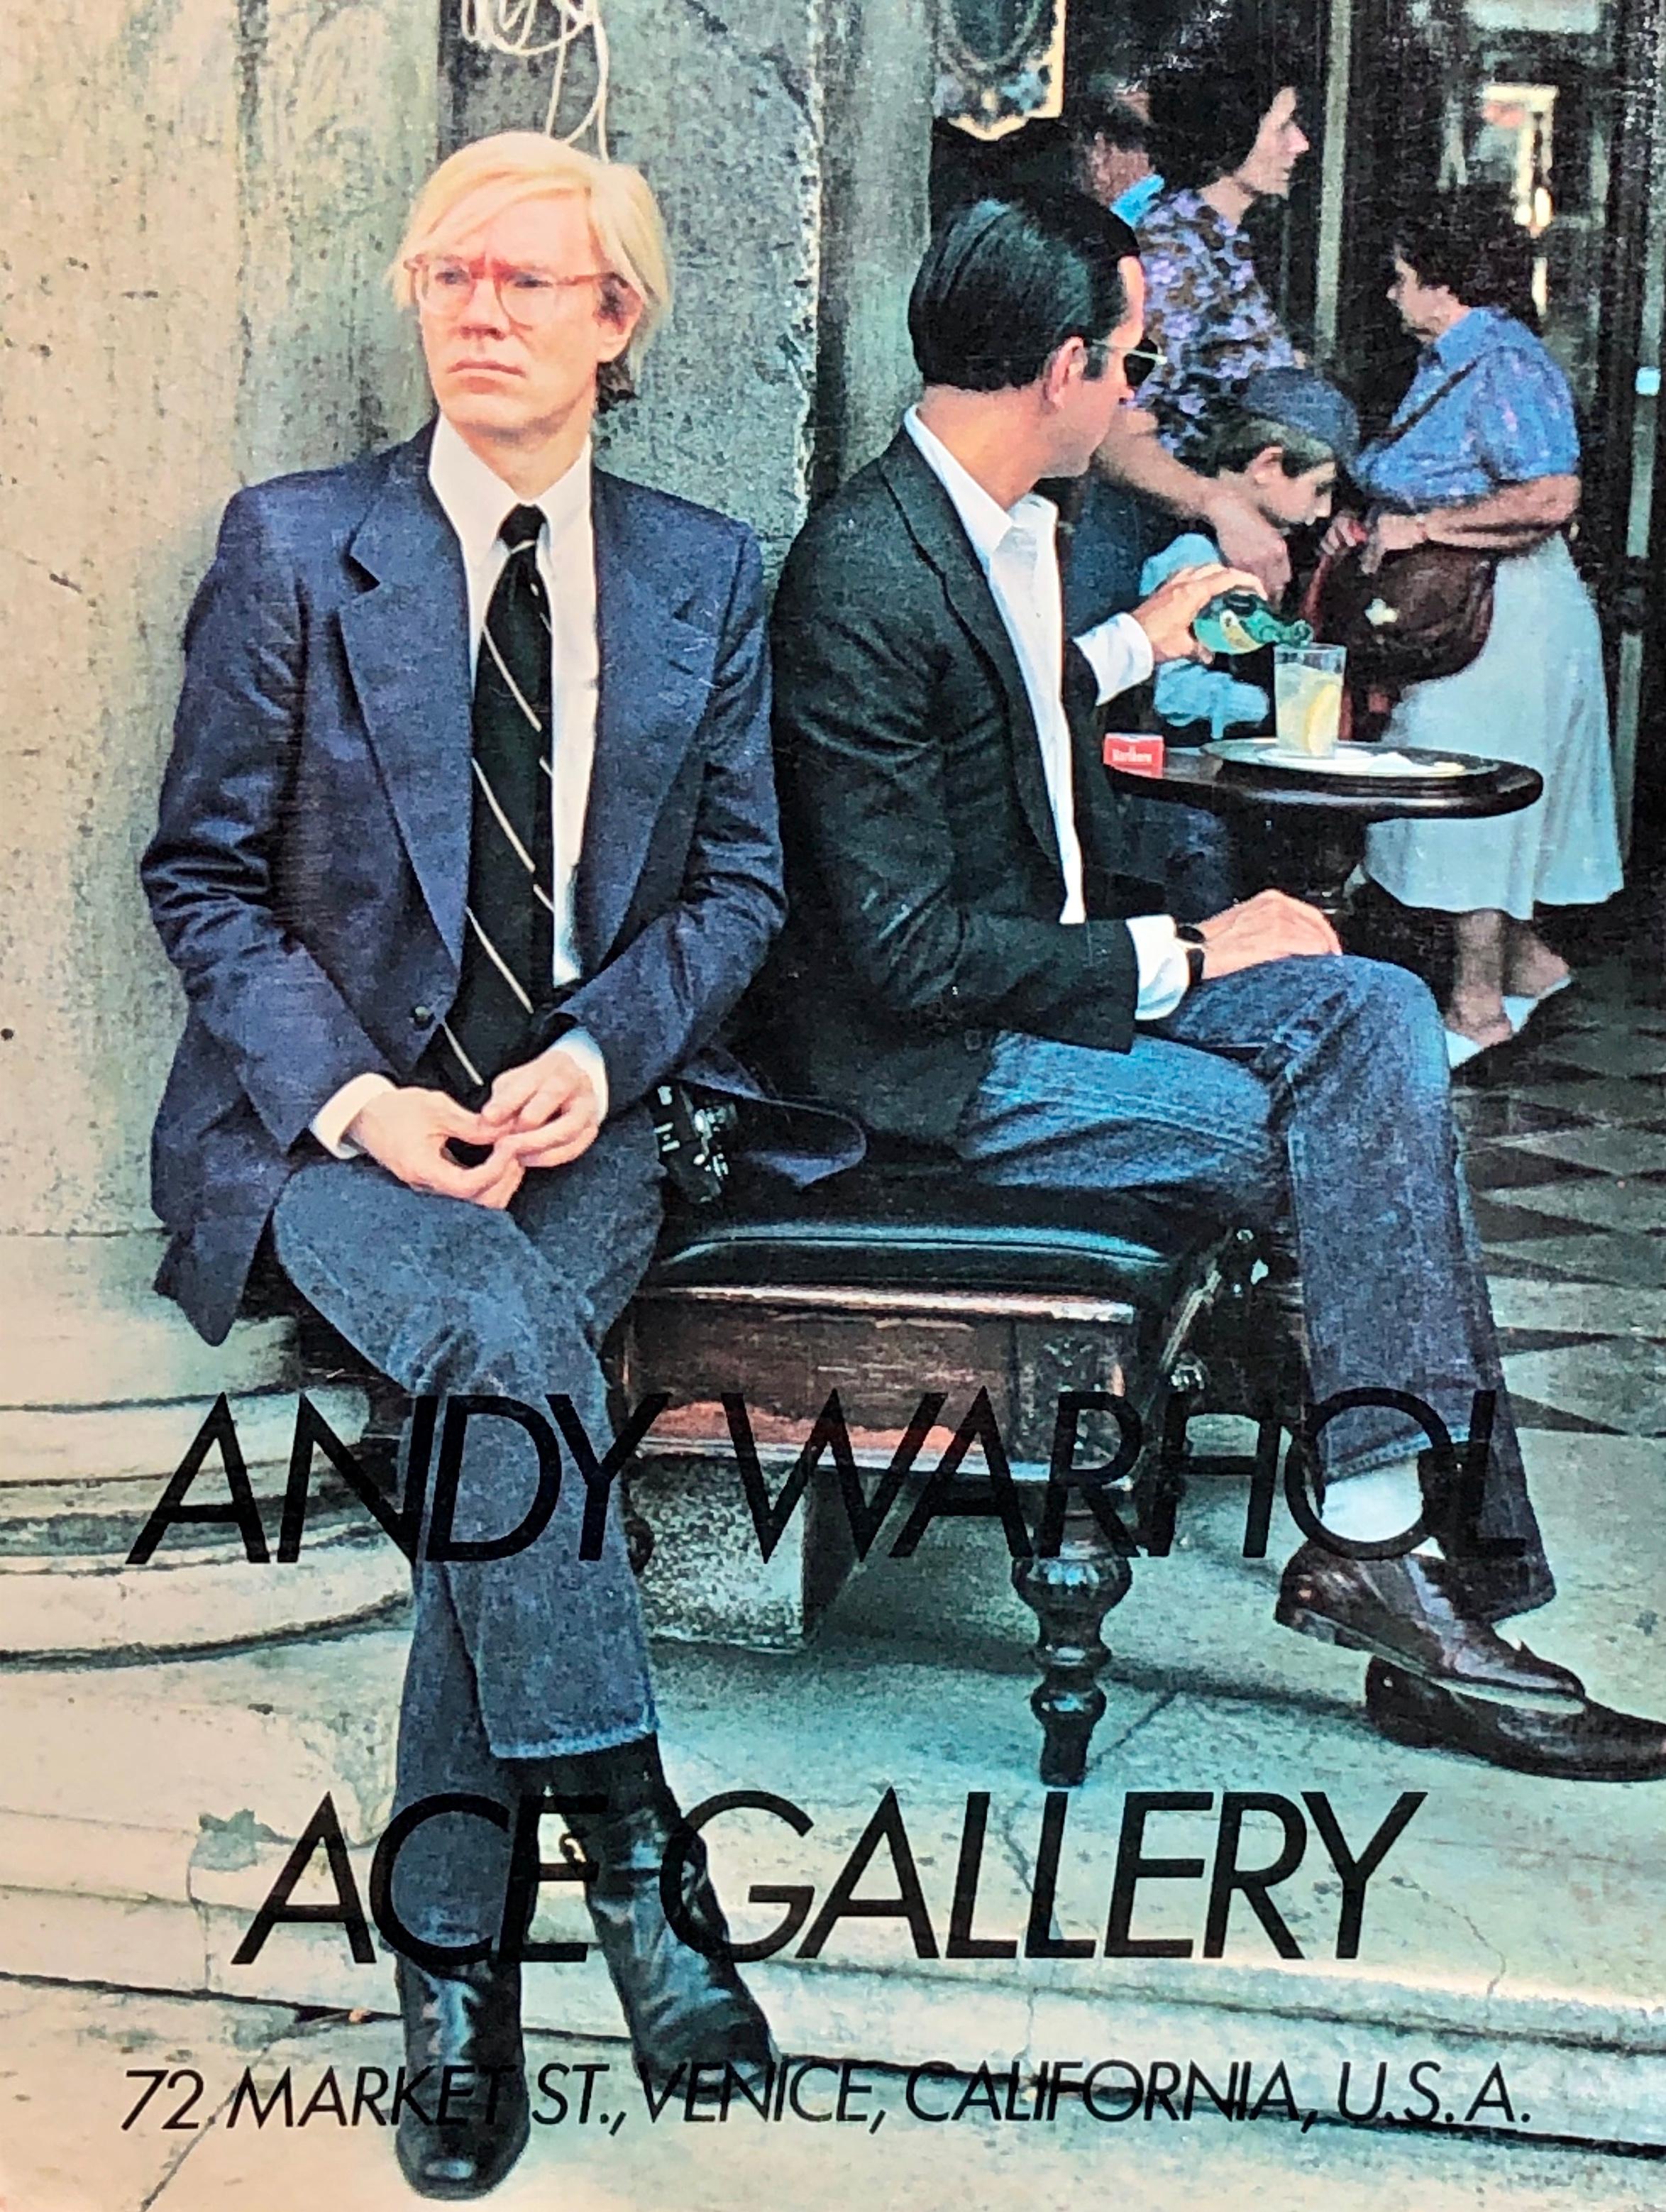 Vintage Andy Warhol Ace Gallery advertisement (Warhol posters)  - Print by (after) Andy Warhol